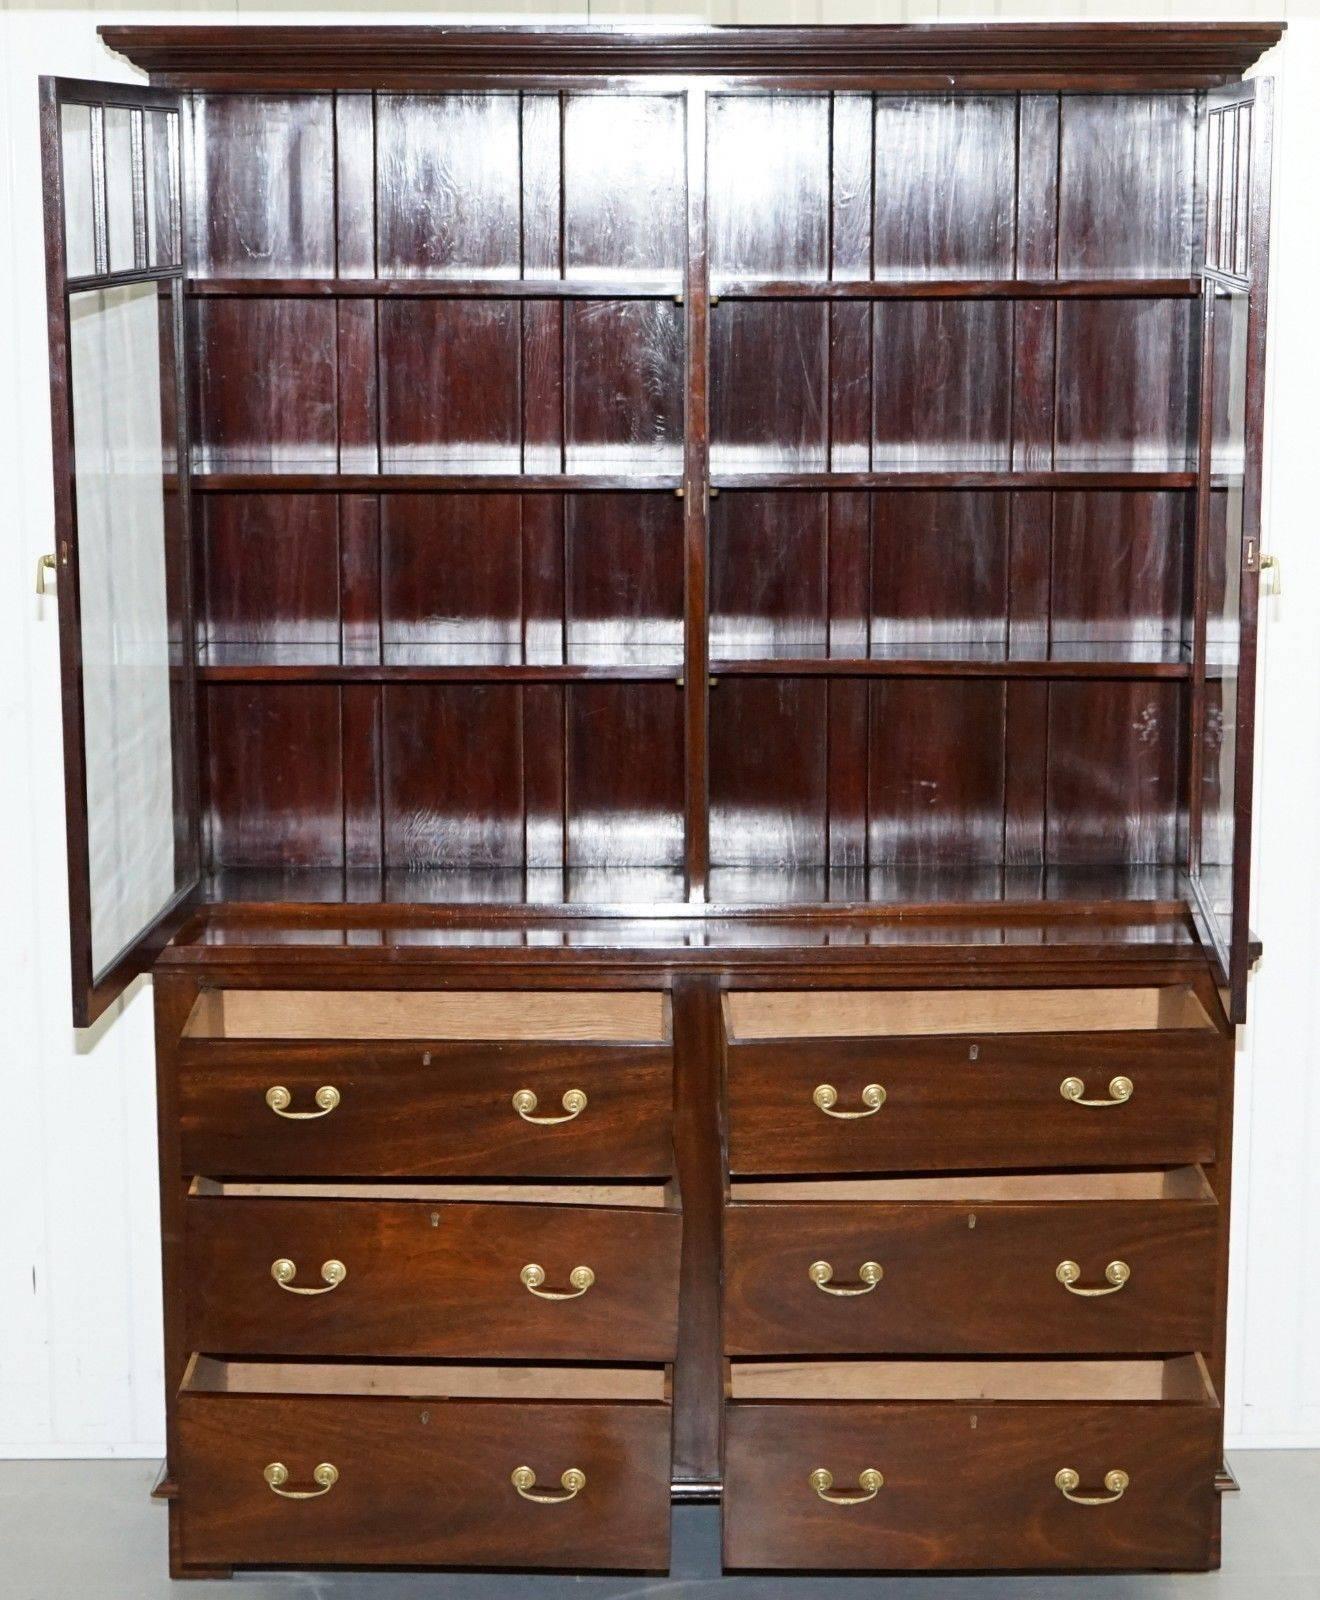 Late Georgian Early Victorian Mahogany Library Bookcase Dresser Cabinet Drawers 2